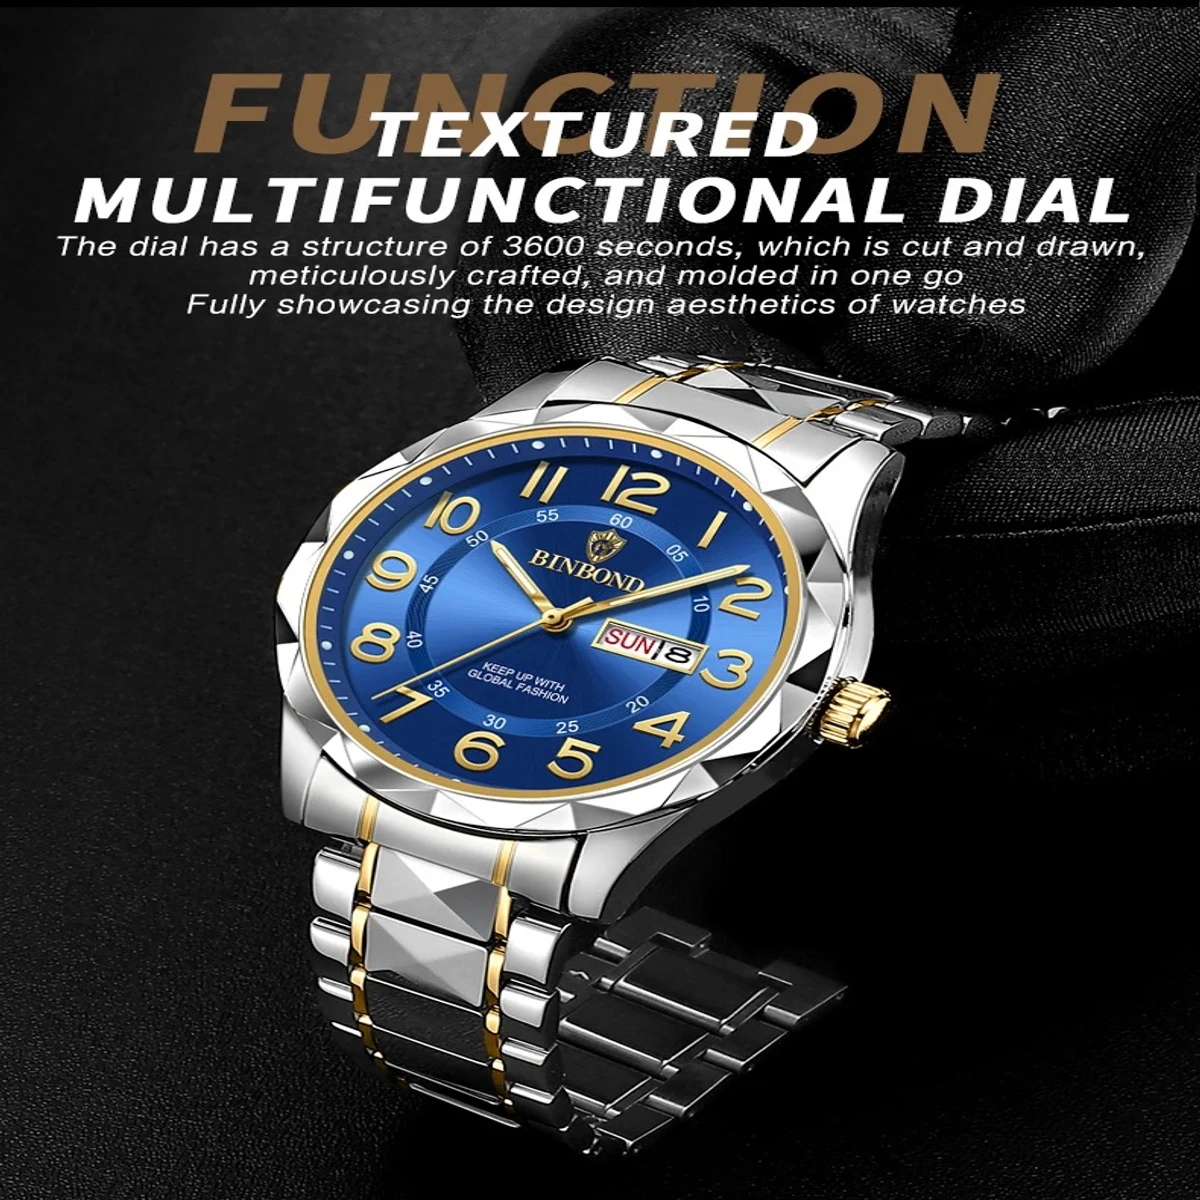 Luxury Binbond Dimon card Digain Stainless Steel Classic Waterproof Watch BINBOND MODEL 5663 CHAIN TOTON AR DIAL BLUE COOLER WATCH FOR MAN